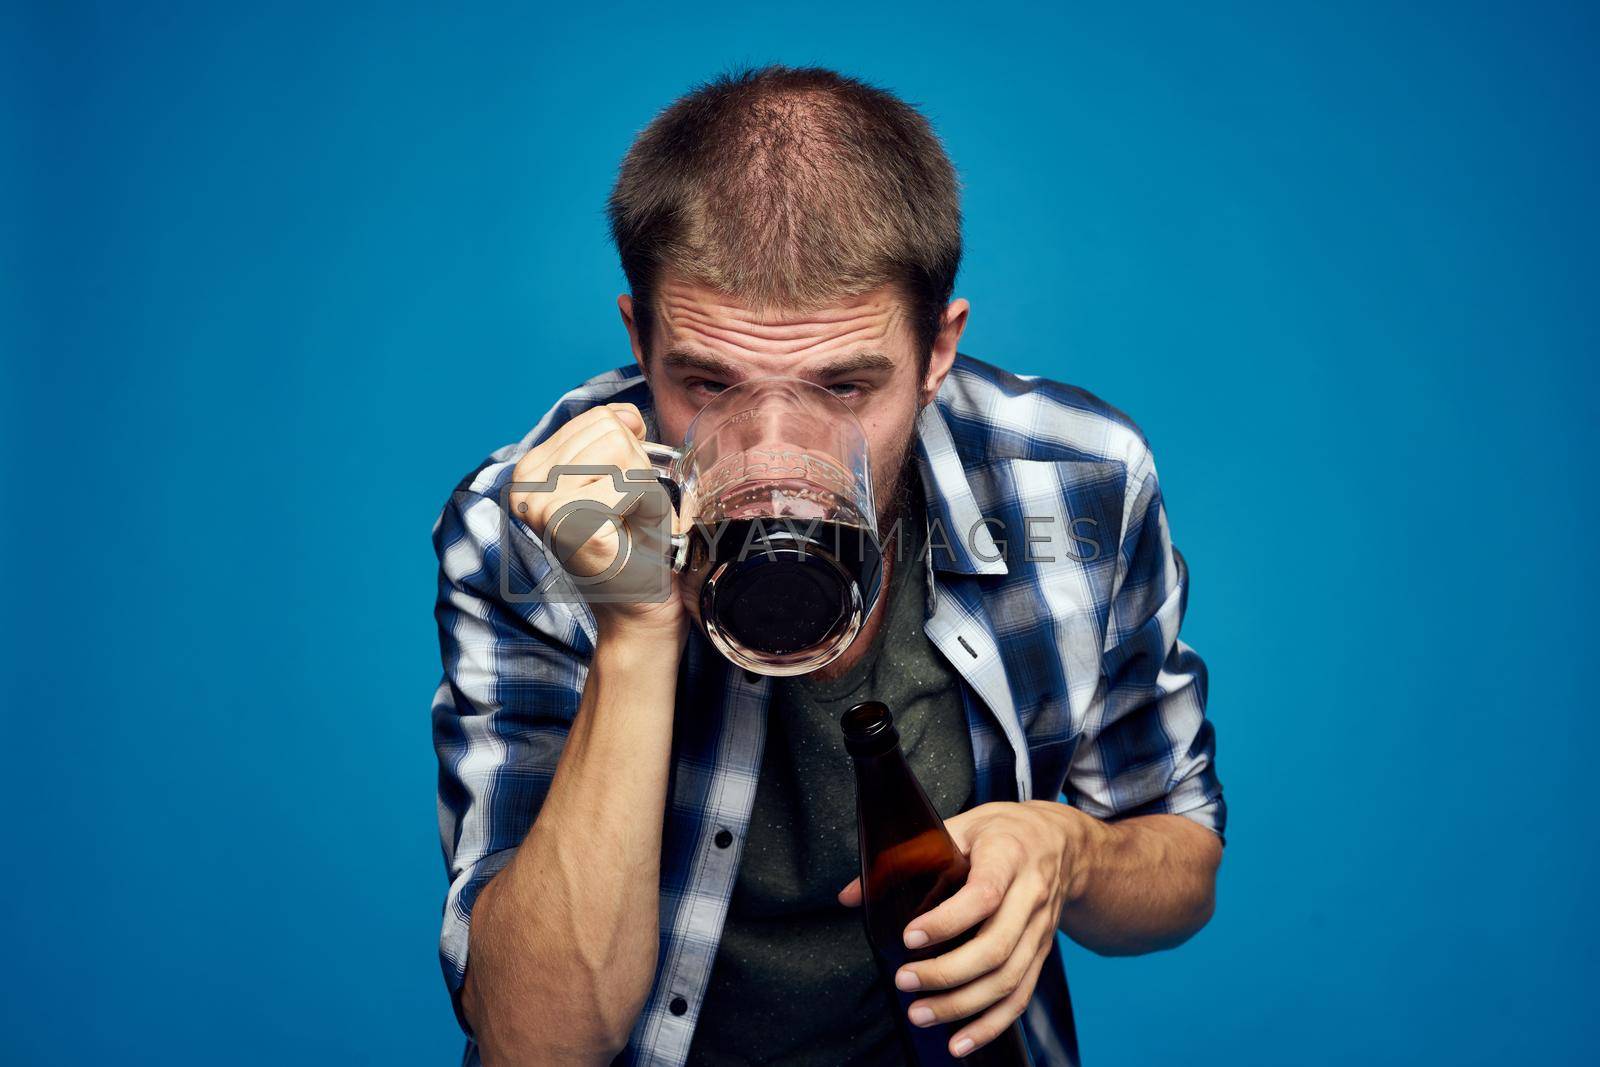 Royalty free image of drunk man alcoholism problems emotions depression blue background by Vichizh